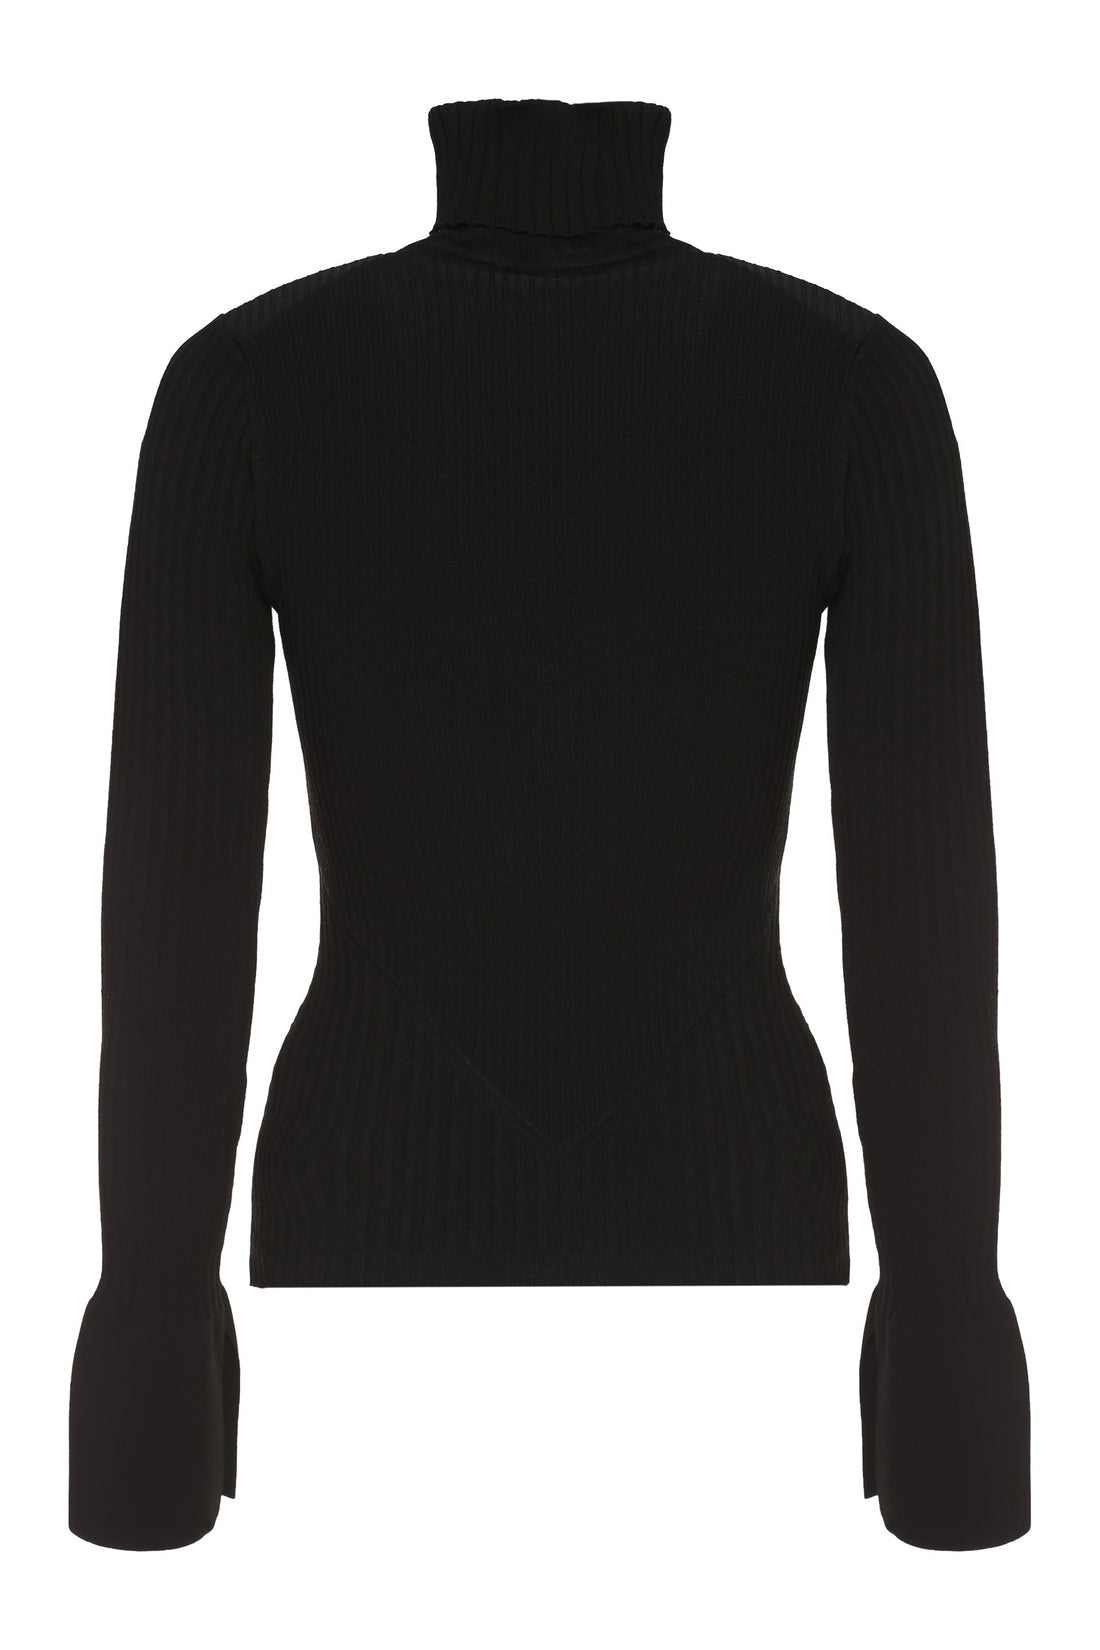 ANDREADAMO-OUTLET-SALE-Ribbed turtleneck sweater-ARCHIVIST